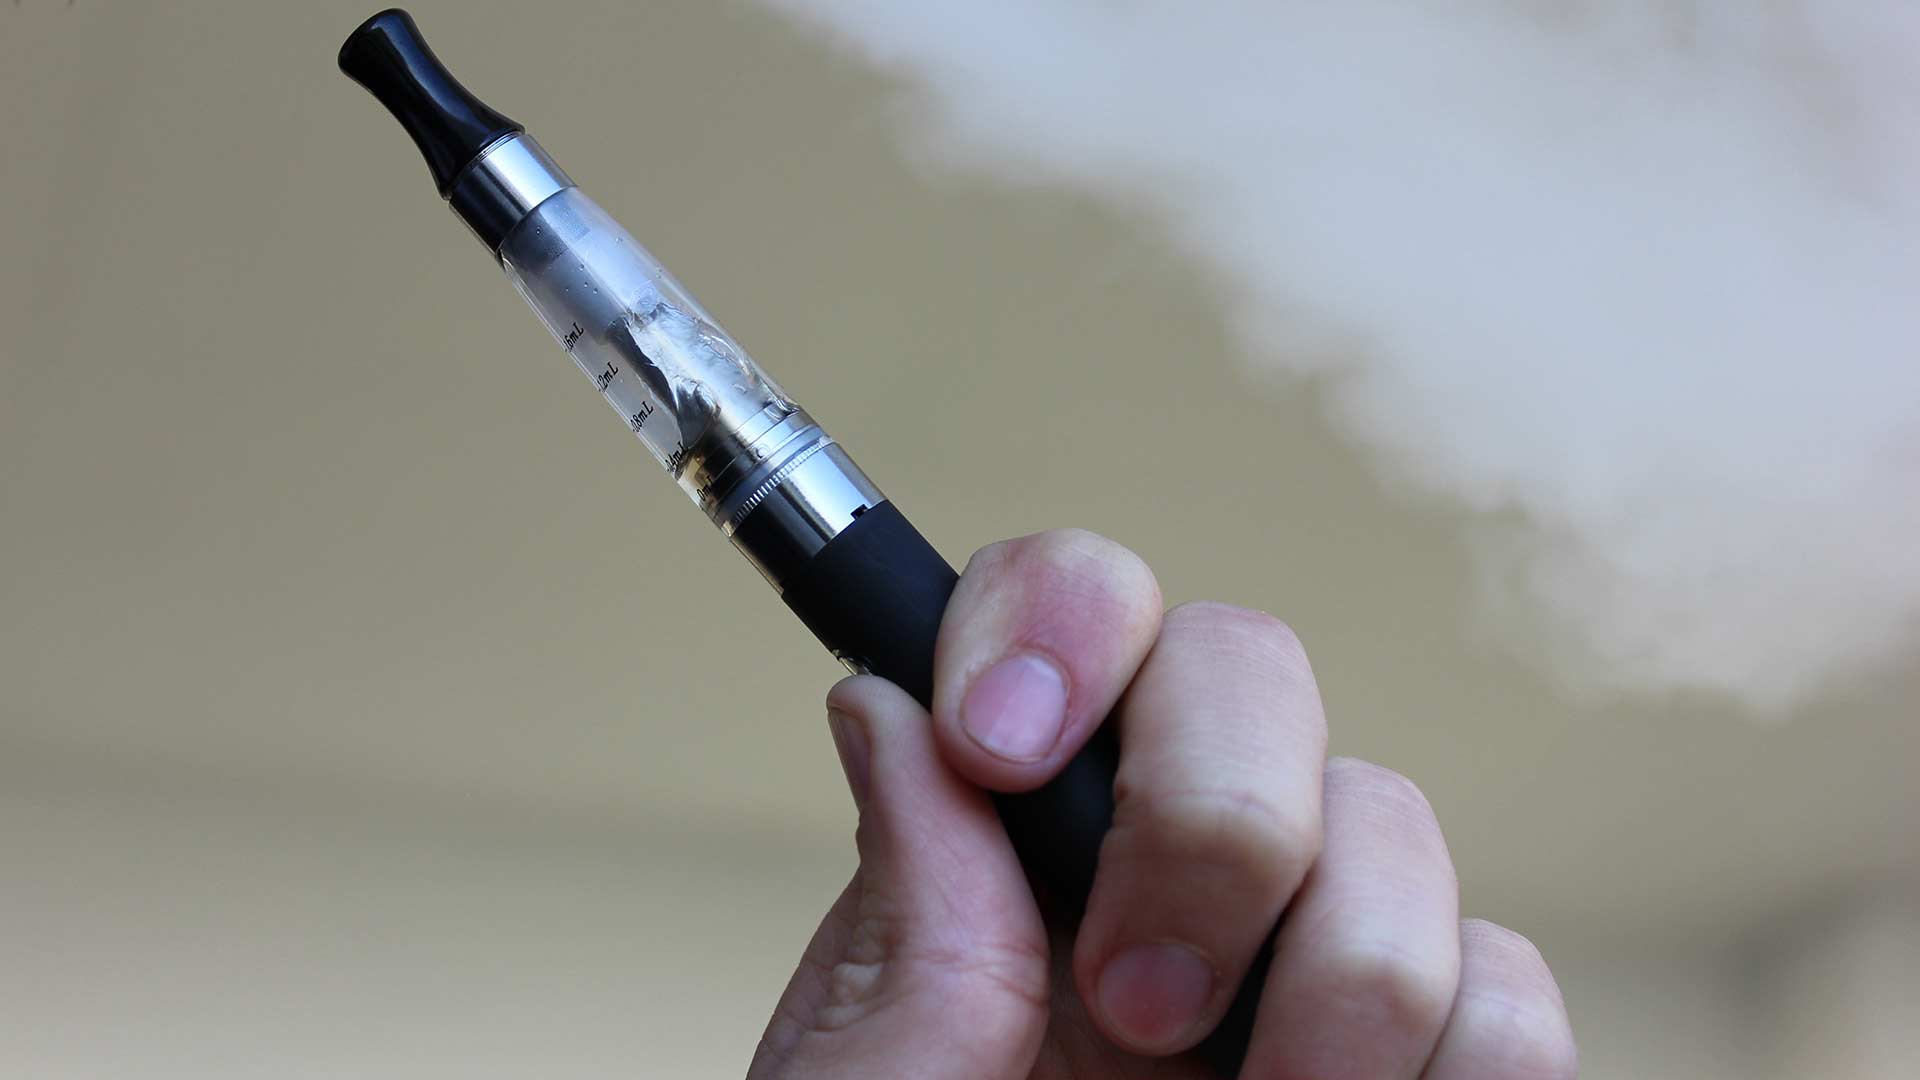 Studies show e-cigarette use continues to grow among minors.